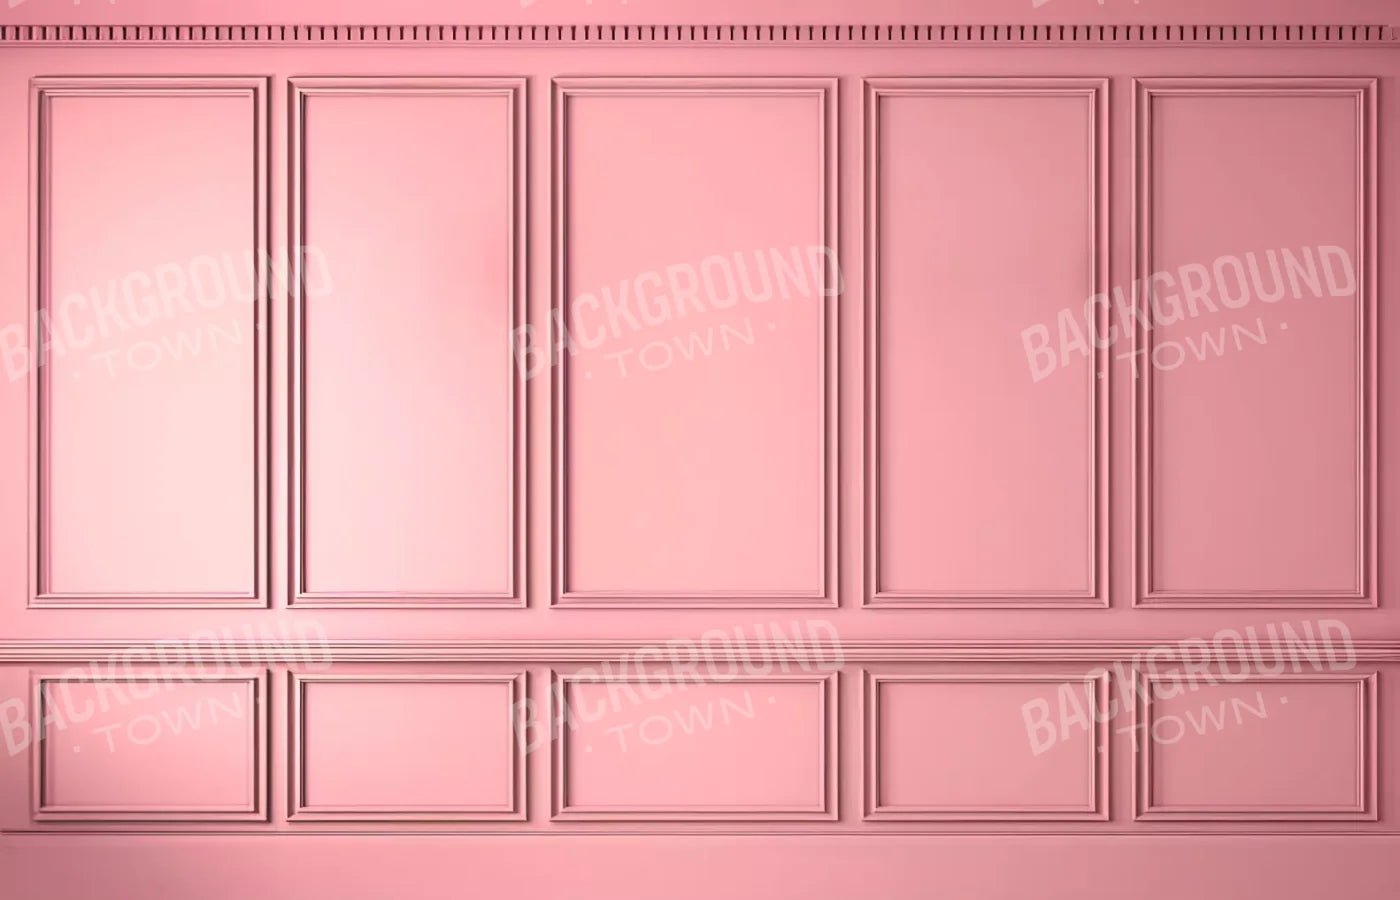 Carrie Pink 2 14’X9’ Ultracloth (168 X 108 Inch) Backdrop